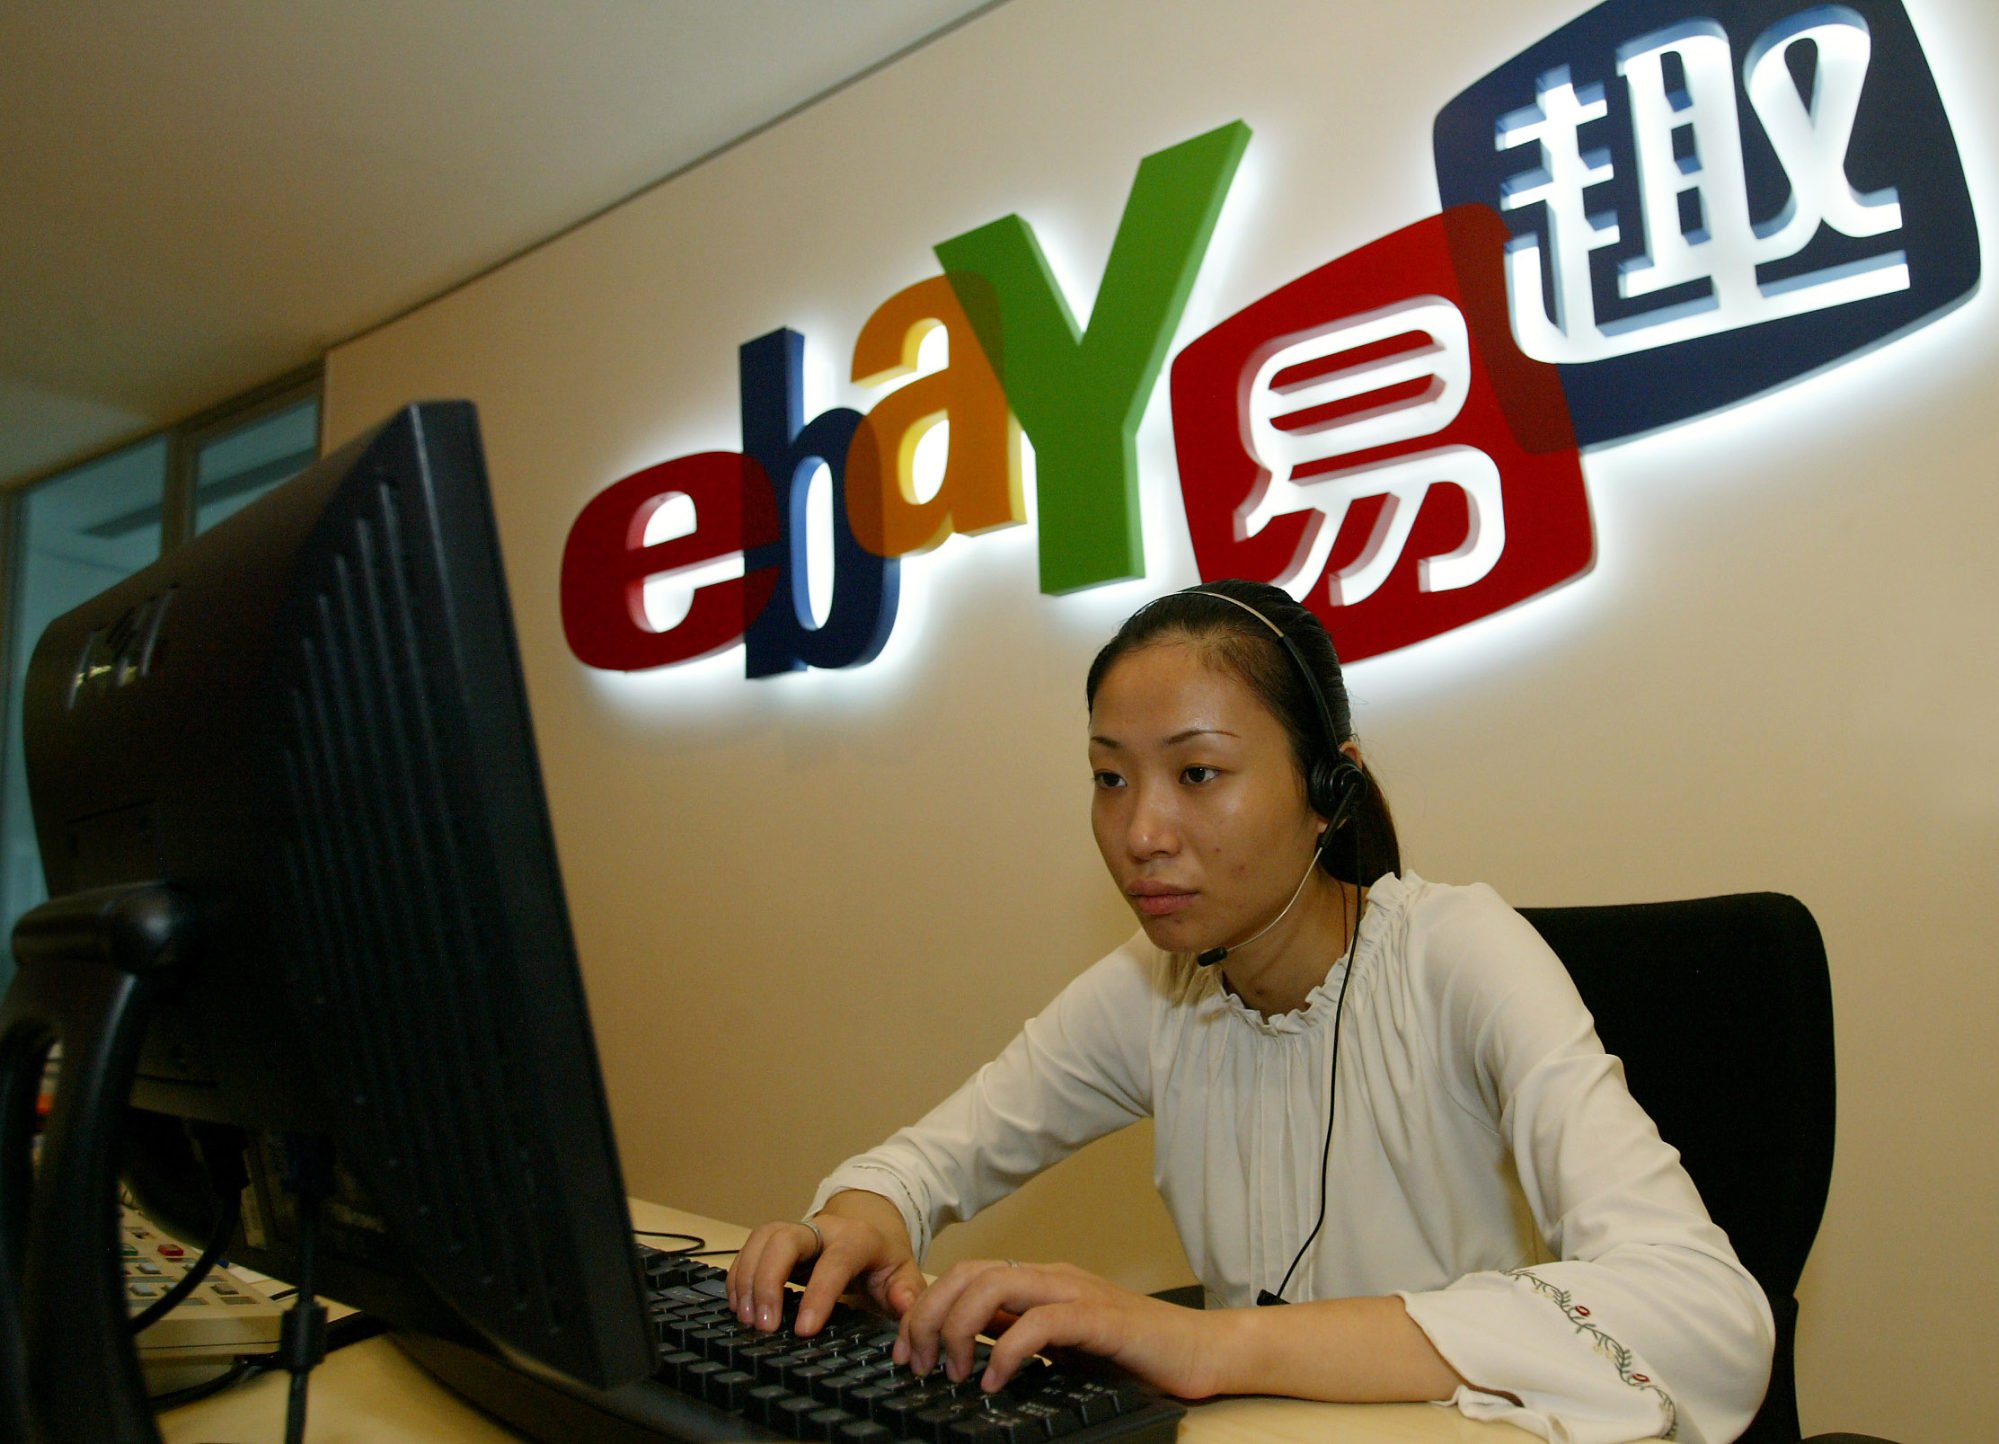 A Chinese worker checks her computer at eBay Eachnet’s offices in Shanghai on September 16, 2004. Photo: Reuters